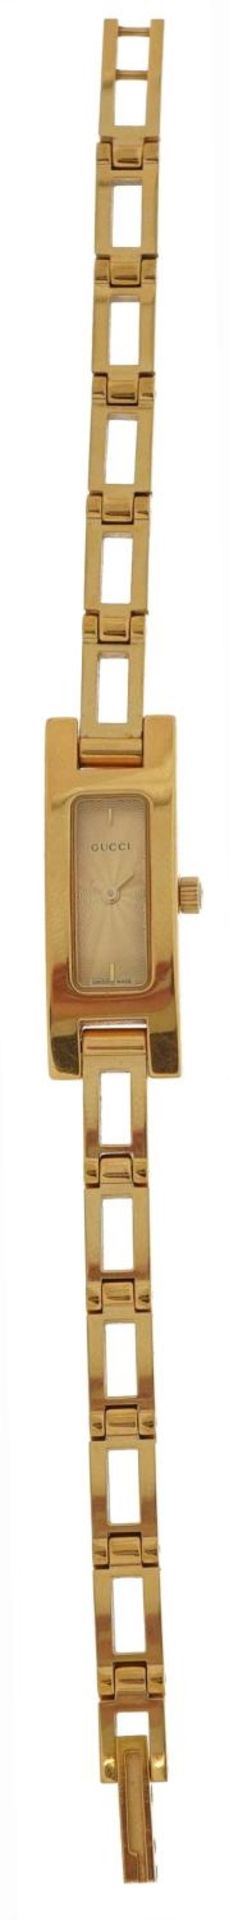 Gucci, ladies gold plated Gucci 3900L wristwatch, serial number 0193323, the case 12mm wide - Image 2 of 6